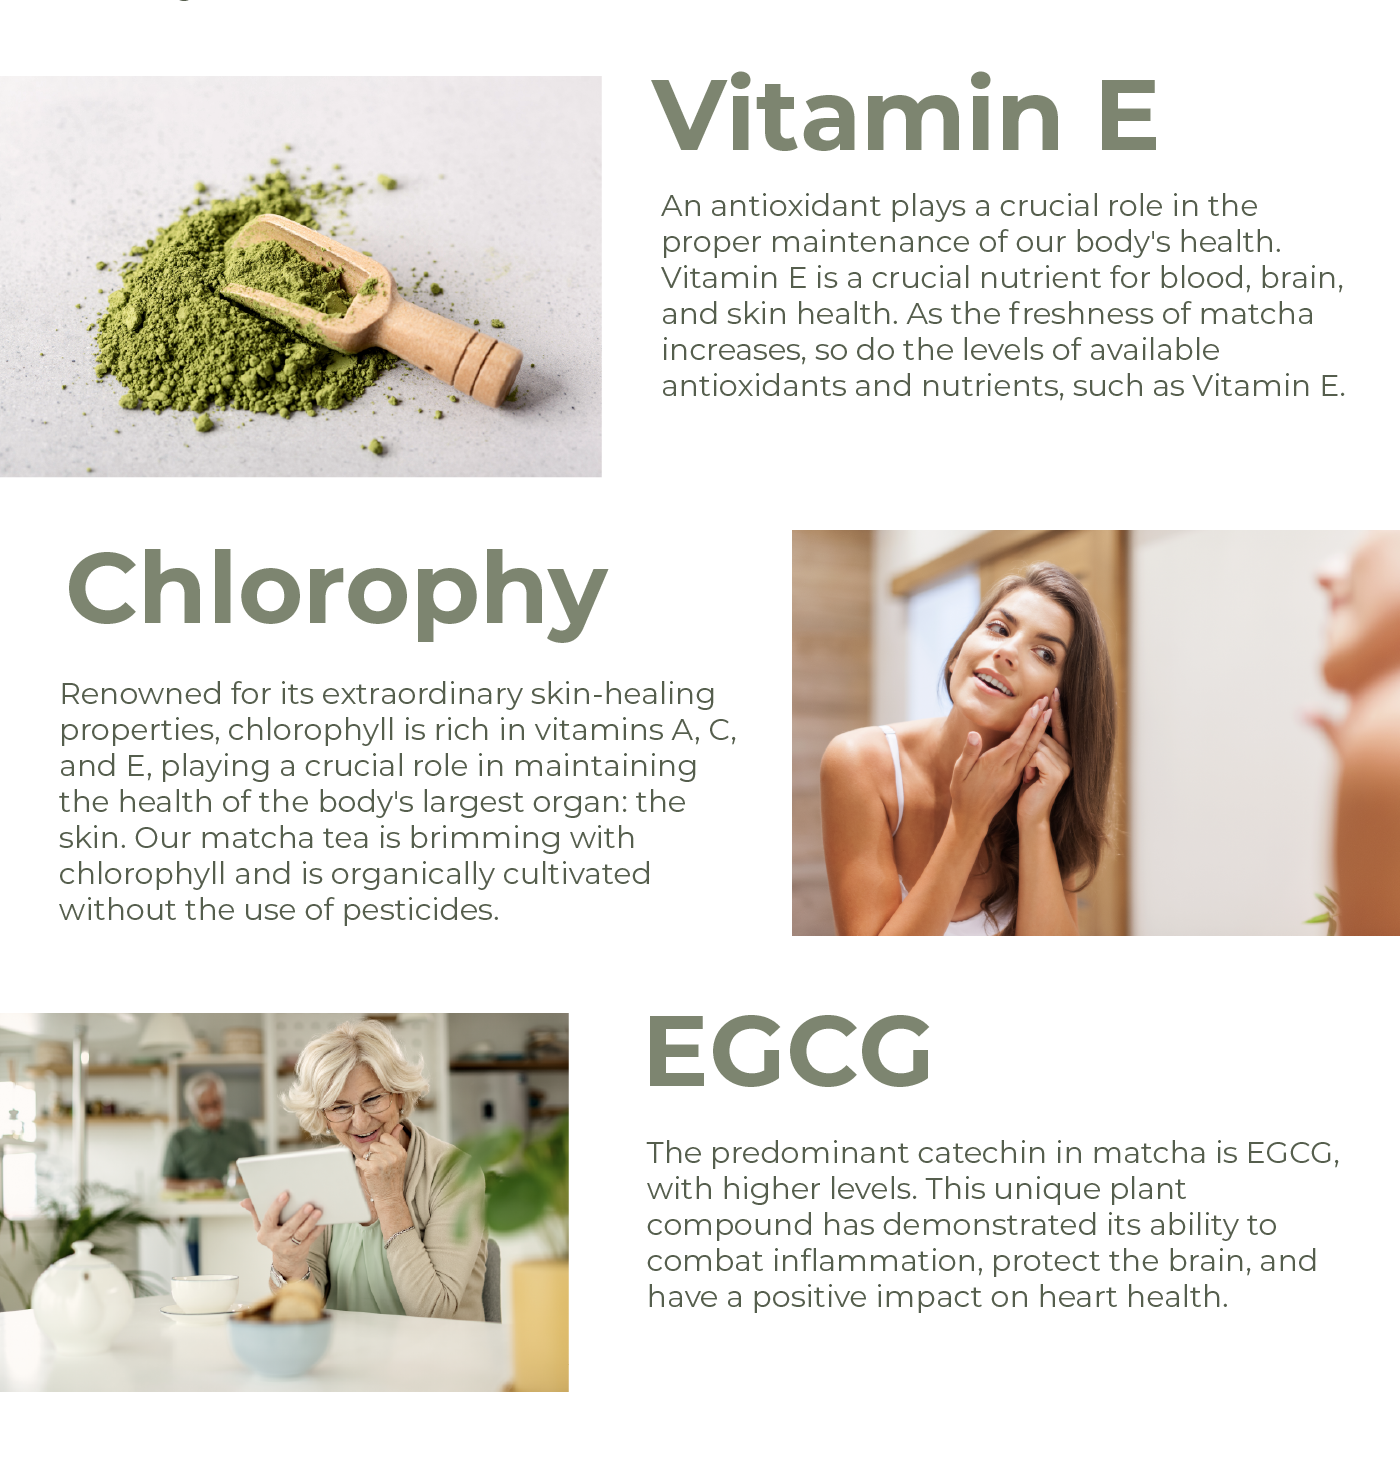 Vitamin E An antioxidant with an essential role in maintaining overall health. Vitamin E is an important nutrient for blood, brain, and skin health. The fresher the matcha, the higher the levels of antioxidants and nutrients available, such as Vitamin E.  Chlorophyll Known for its incredible skin-healing properties, chlorophyll is rich in vitamins A, C, and E, playing a crucial role in keeping the body's largest organ, the skin, healthy. Our matcha tea is full of chlorophyll and is organically cultivated without the use of pesticides.  EGCG The catechin with higher levels in matcha is EGCG. This unique plant compound has been shown to combat inflammation, protect the brain, and have a positive impact on heart health.